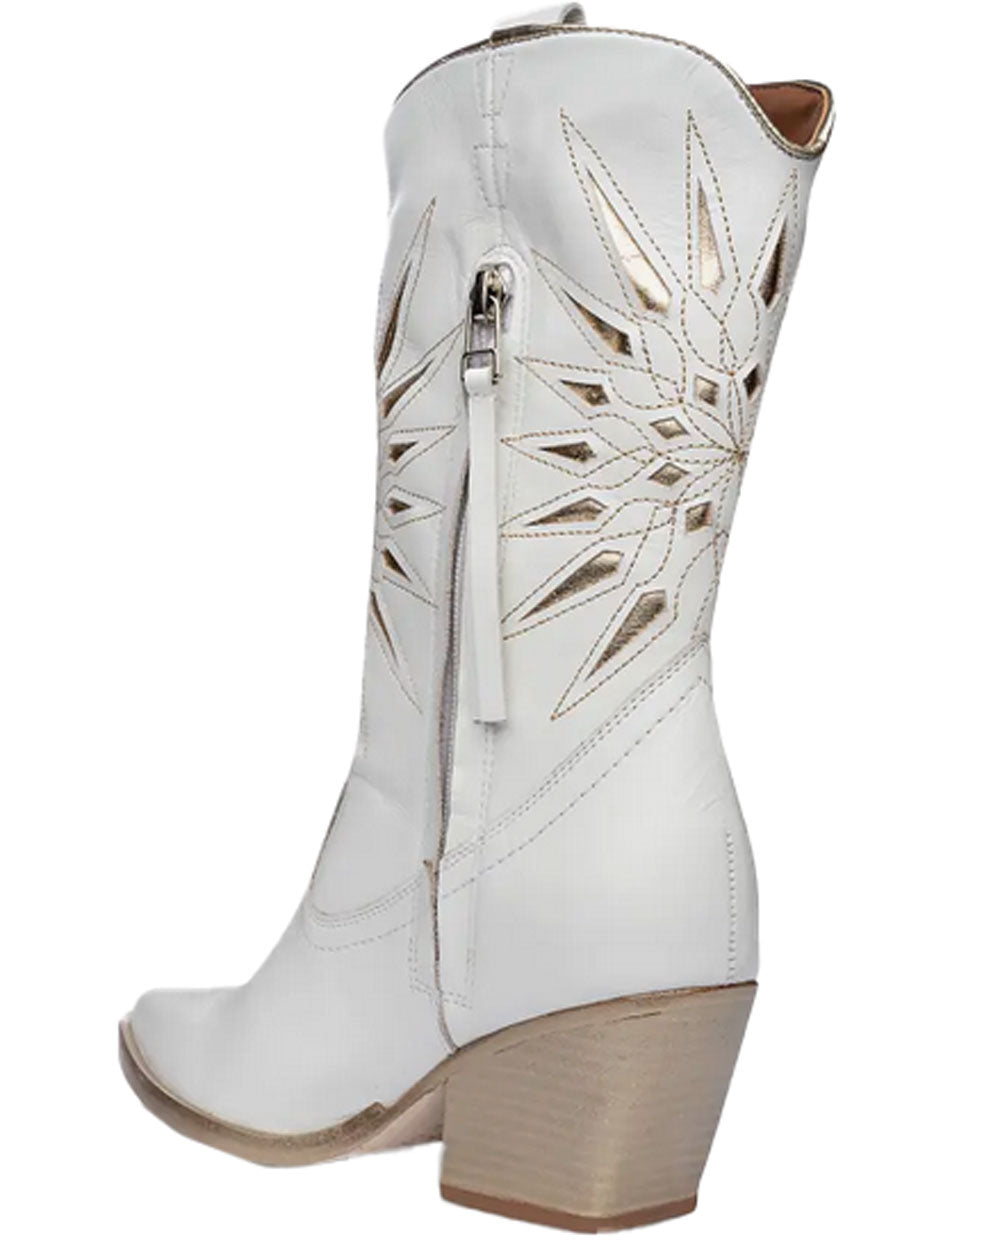 Mae Cowboy Boot in White and Gold